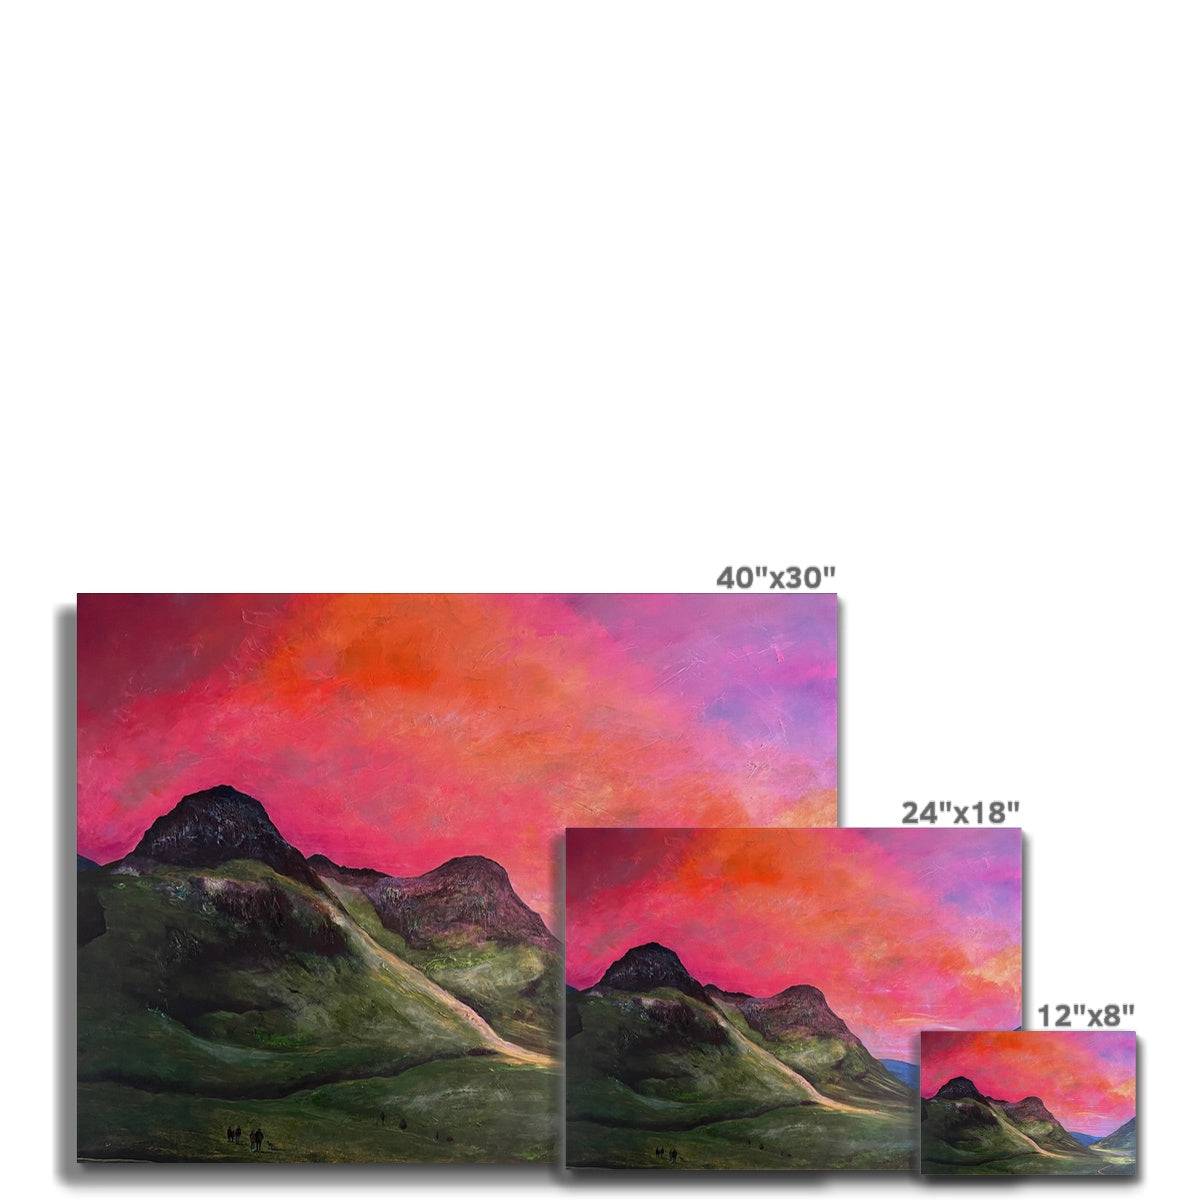 Glencoe Dusk Painting | Canvas From Scotland-Contemporary Stretched Canvas Prints-Glencoe Art Gallery-Paintings, Prints, Homeware, Art Gifts From Scotland By Scottish Artist Kevin Hunter